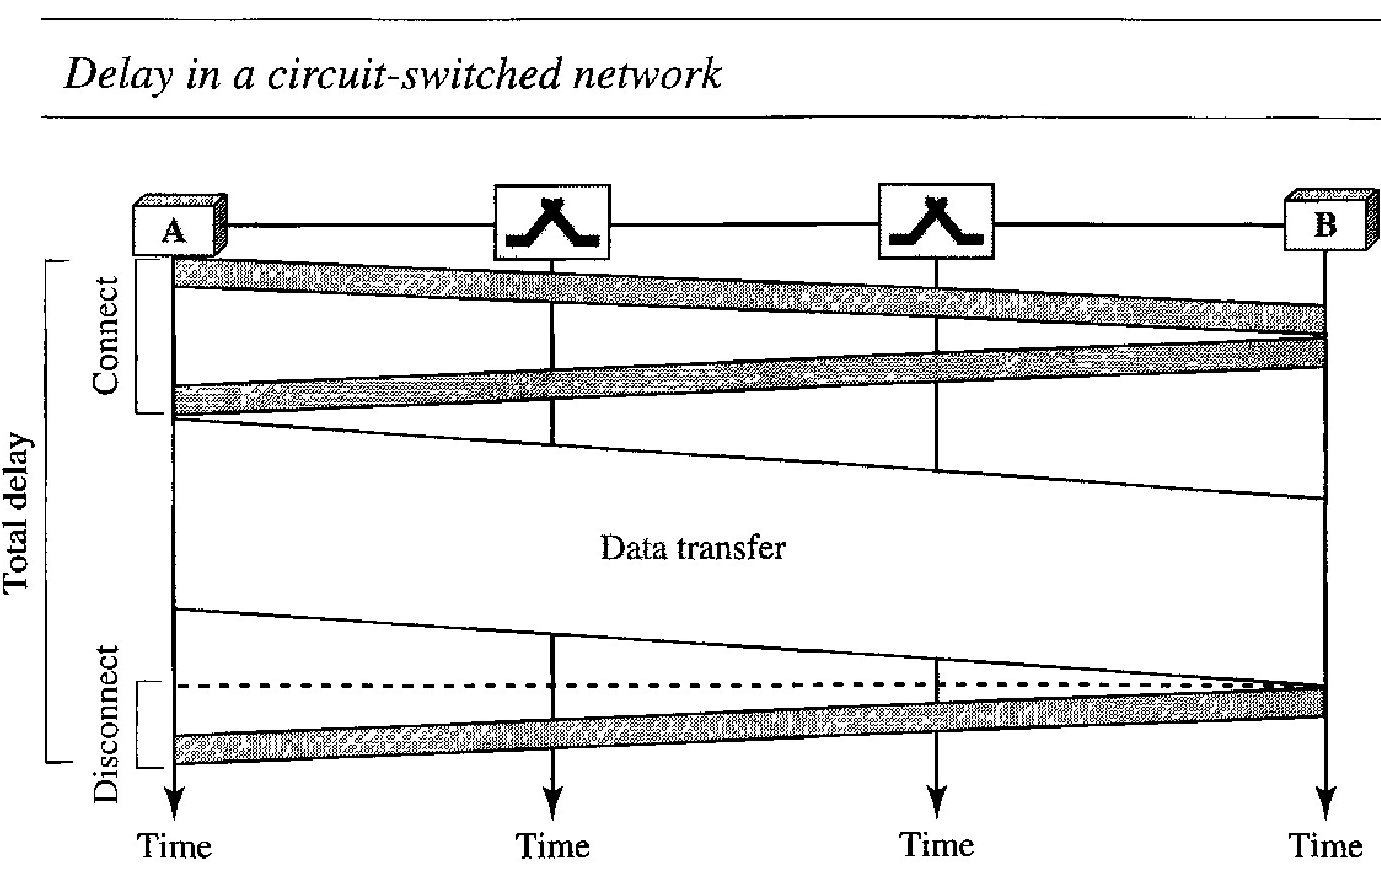 Delay in CIRCUIT-SWITCHED NETWORKS